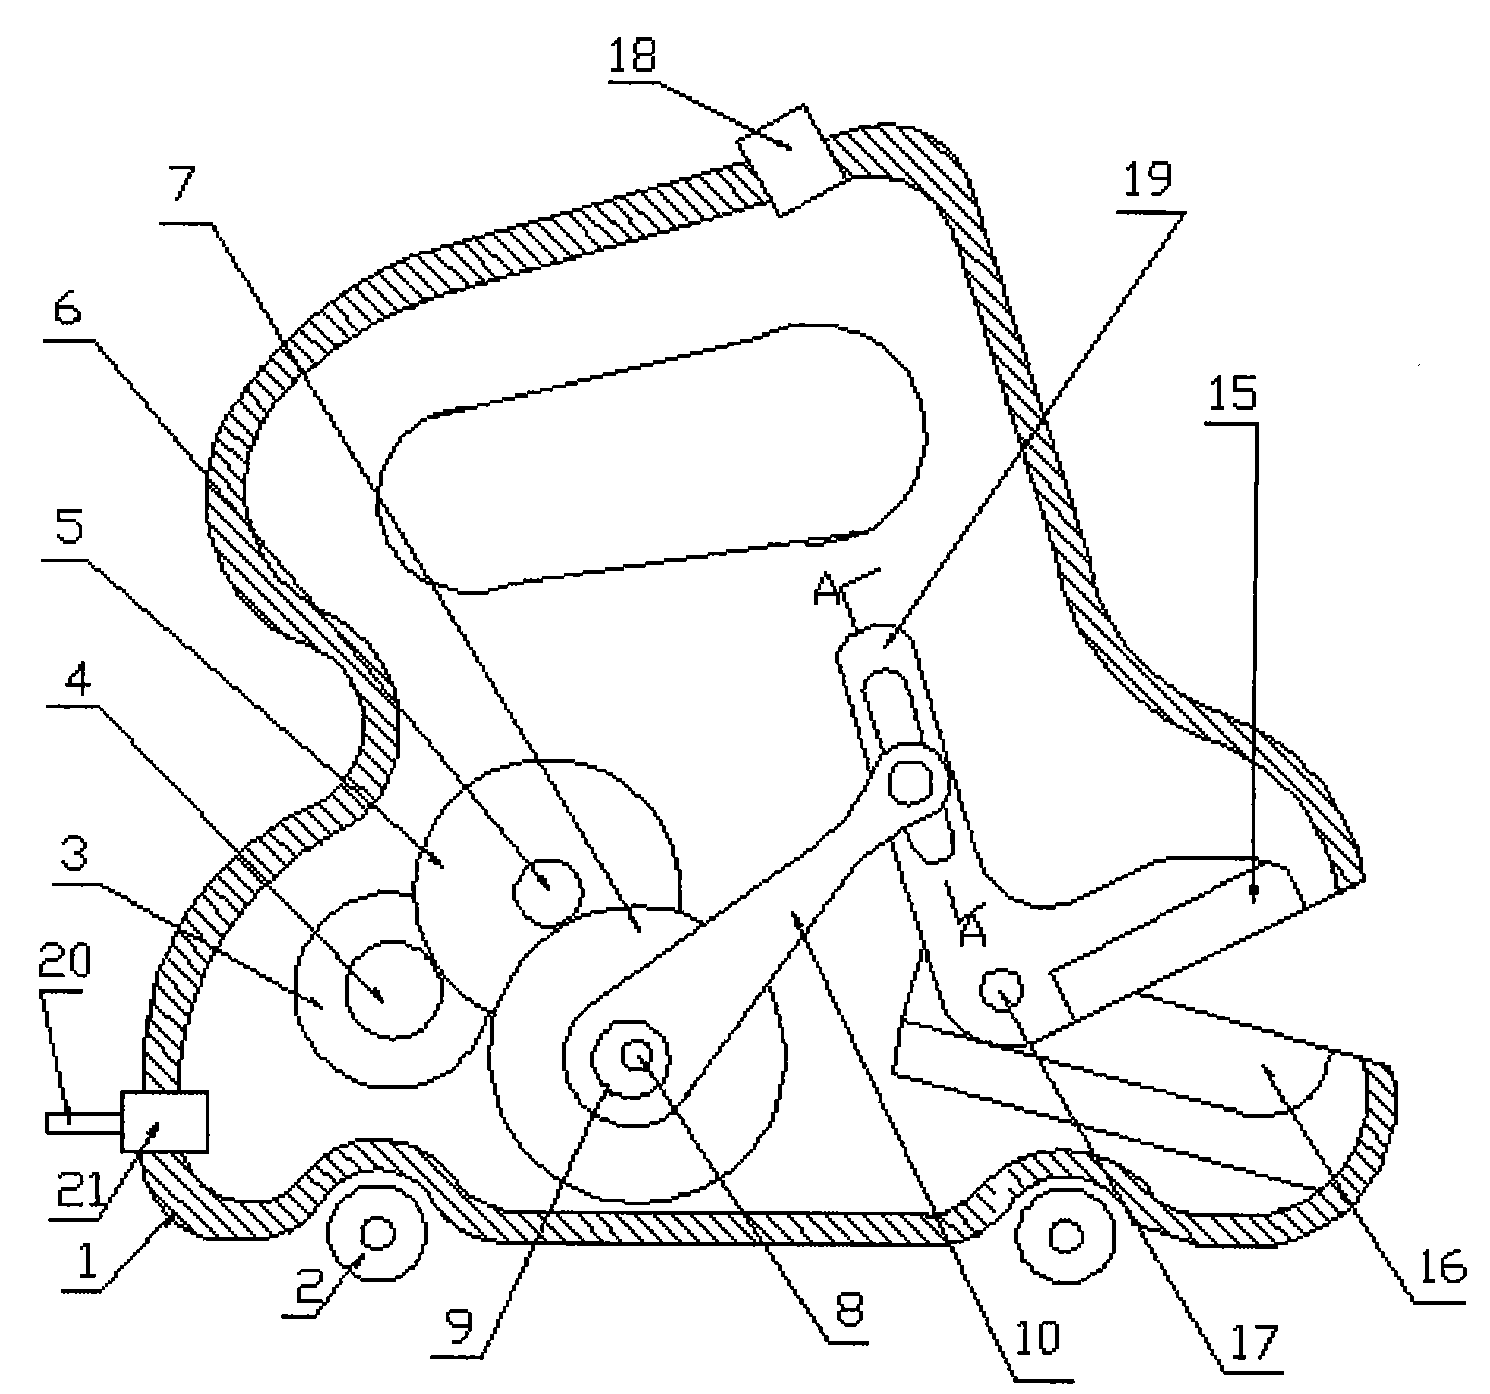 Novel hand-held electric shears with adjustable shearing force